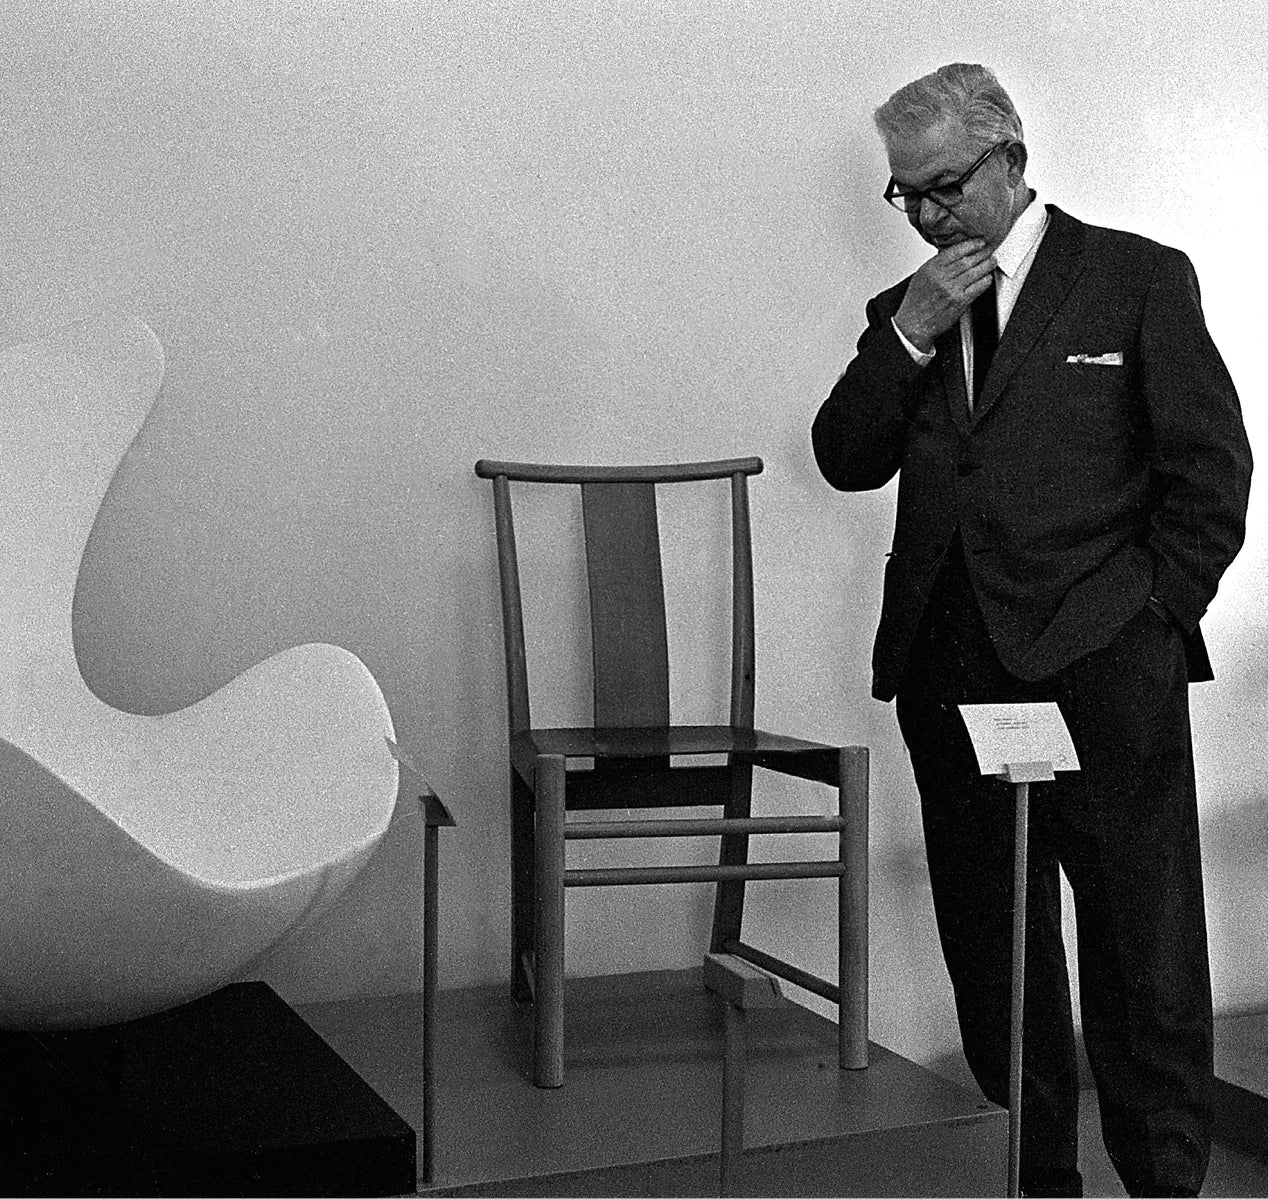 About Arne Jacobsen